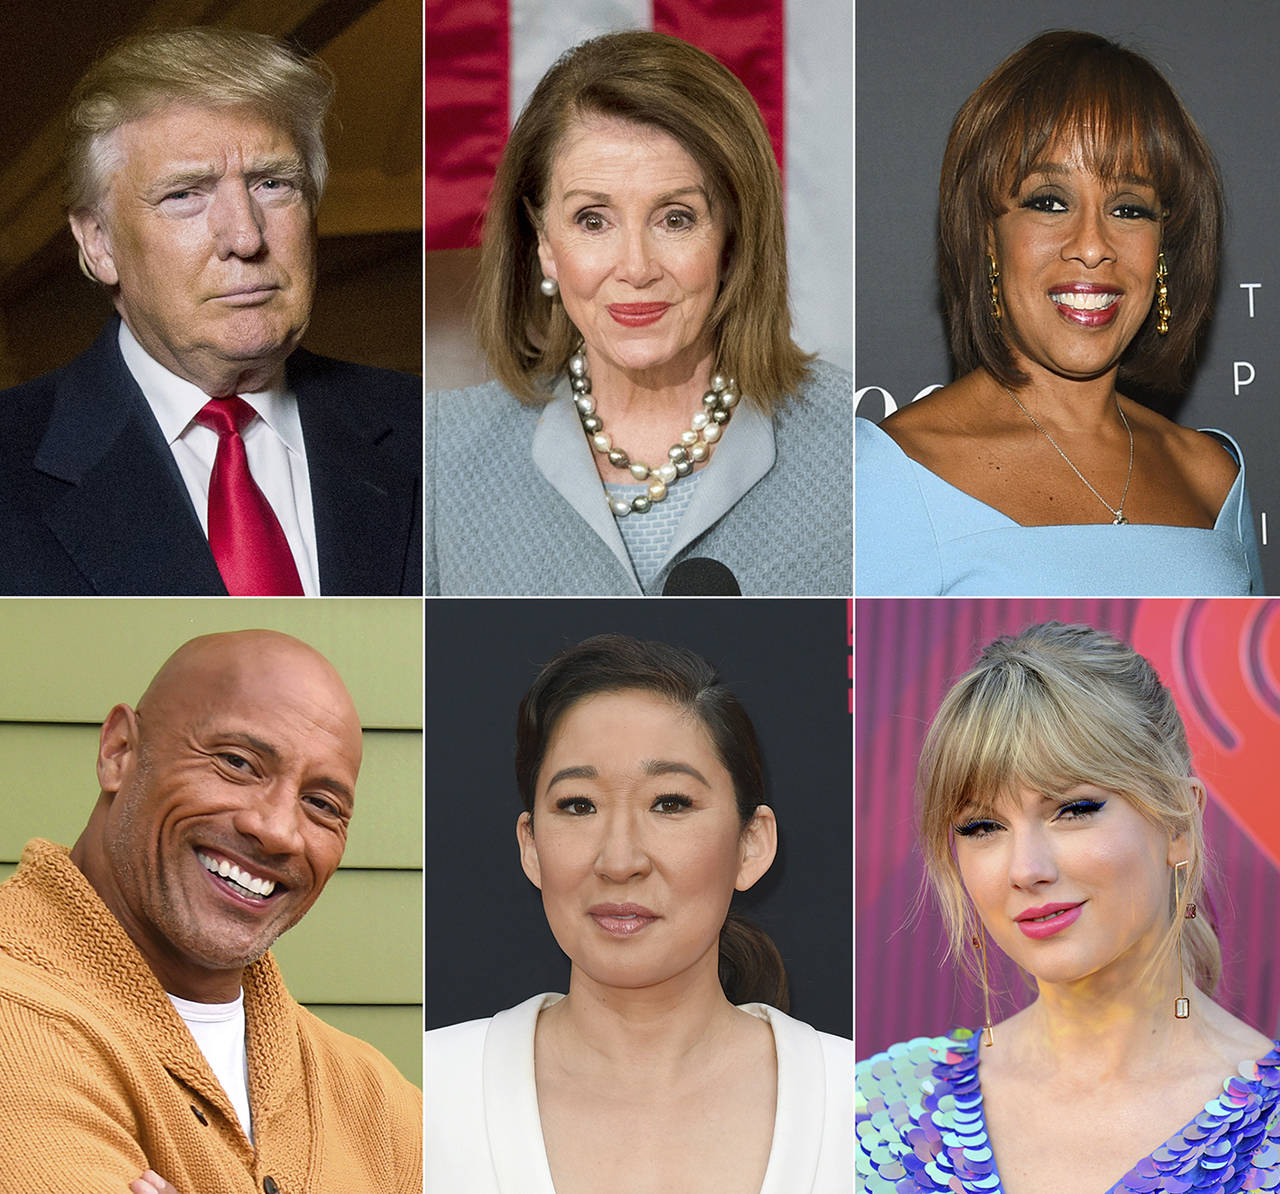 This combination photo shows (top row L-R) President Donald Trump, House Speaker Nancy Pelosi and CBS News’ Gayle King; (bottom row L-R) actor-producer Dwayne Johnson, actress Sandra Oh and singer Taylor Swift. They are among the people honored in Time’s “100 Most Influential People in the World” issue. (AP Photo)